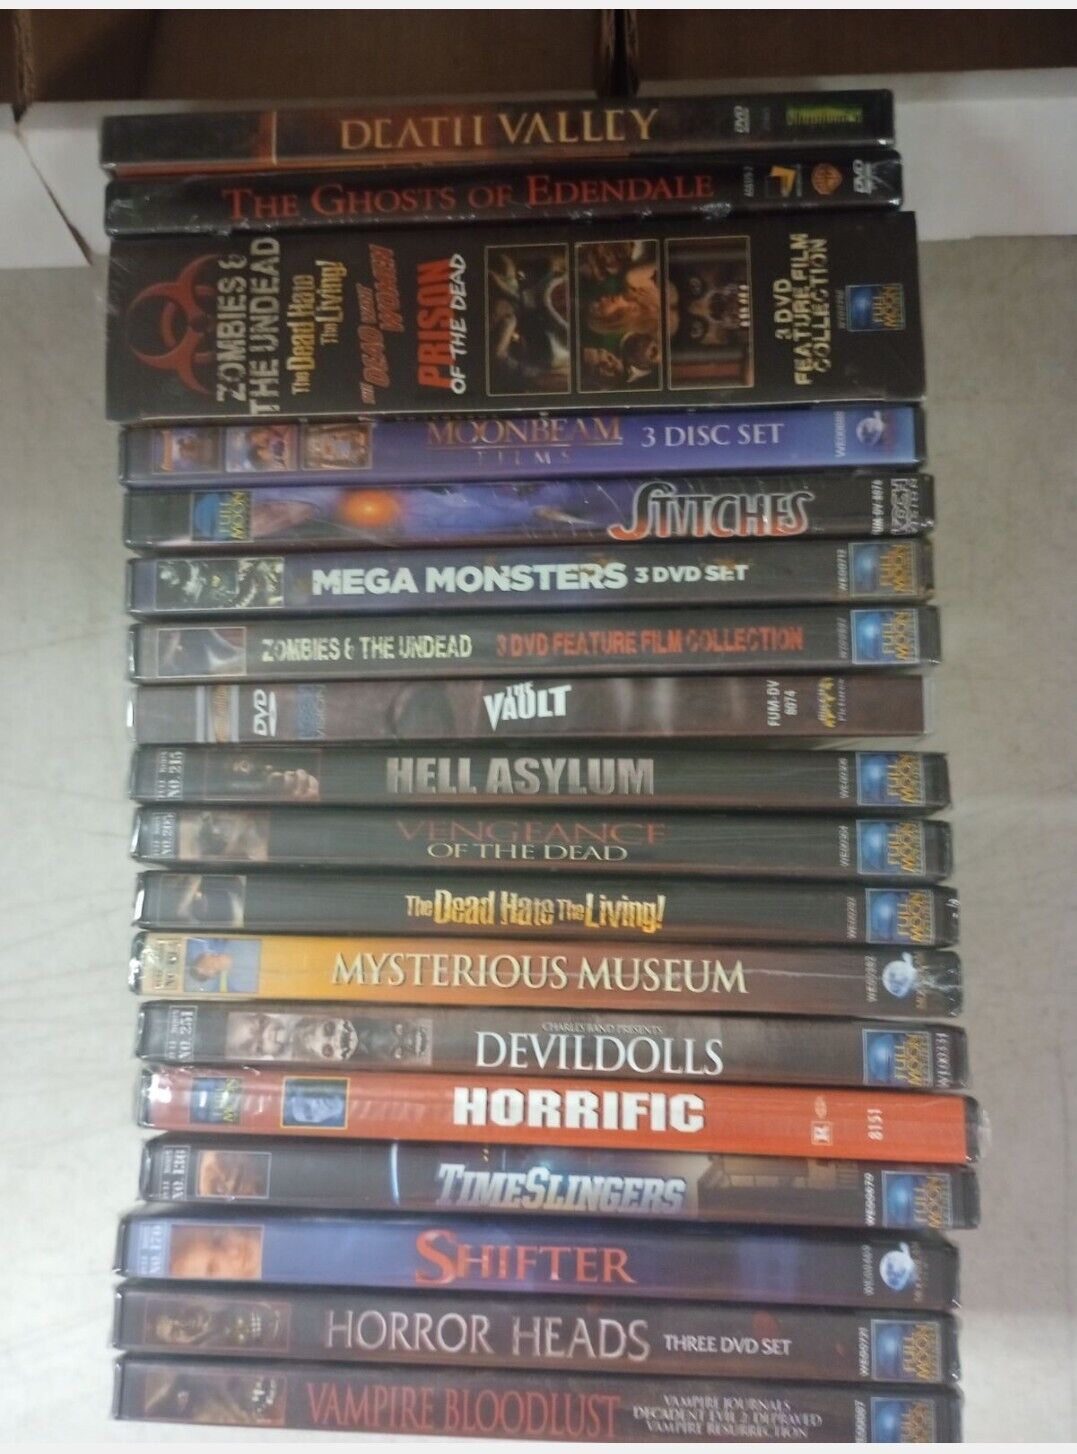 20 RANDOM FULL MOON HORROR DVD MOVIES WITH PIMP DOLL AND MARVIN FIGURES INCLUDED